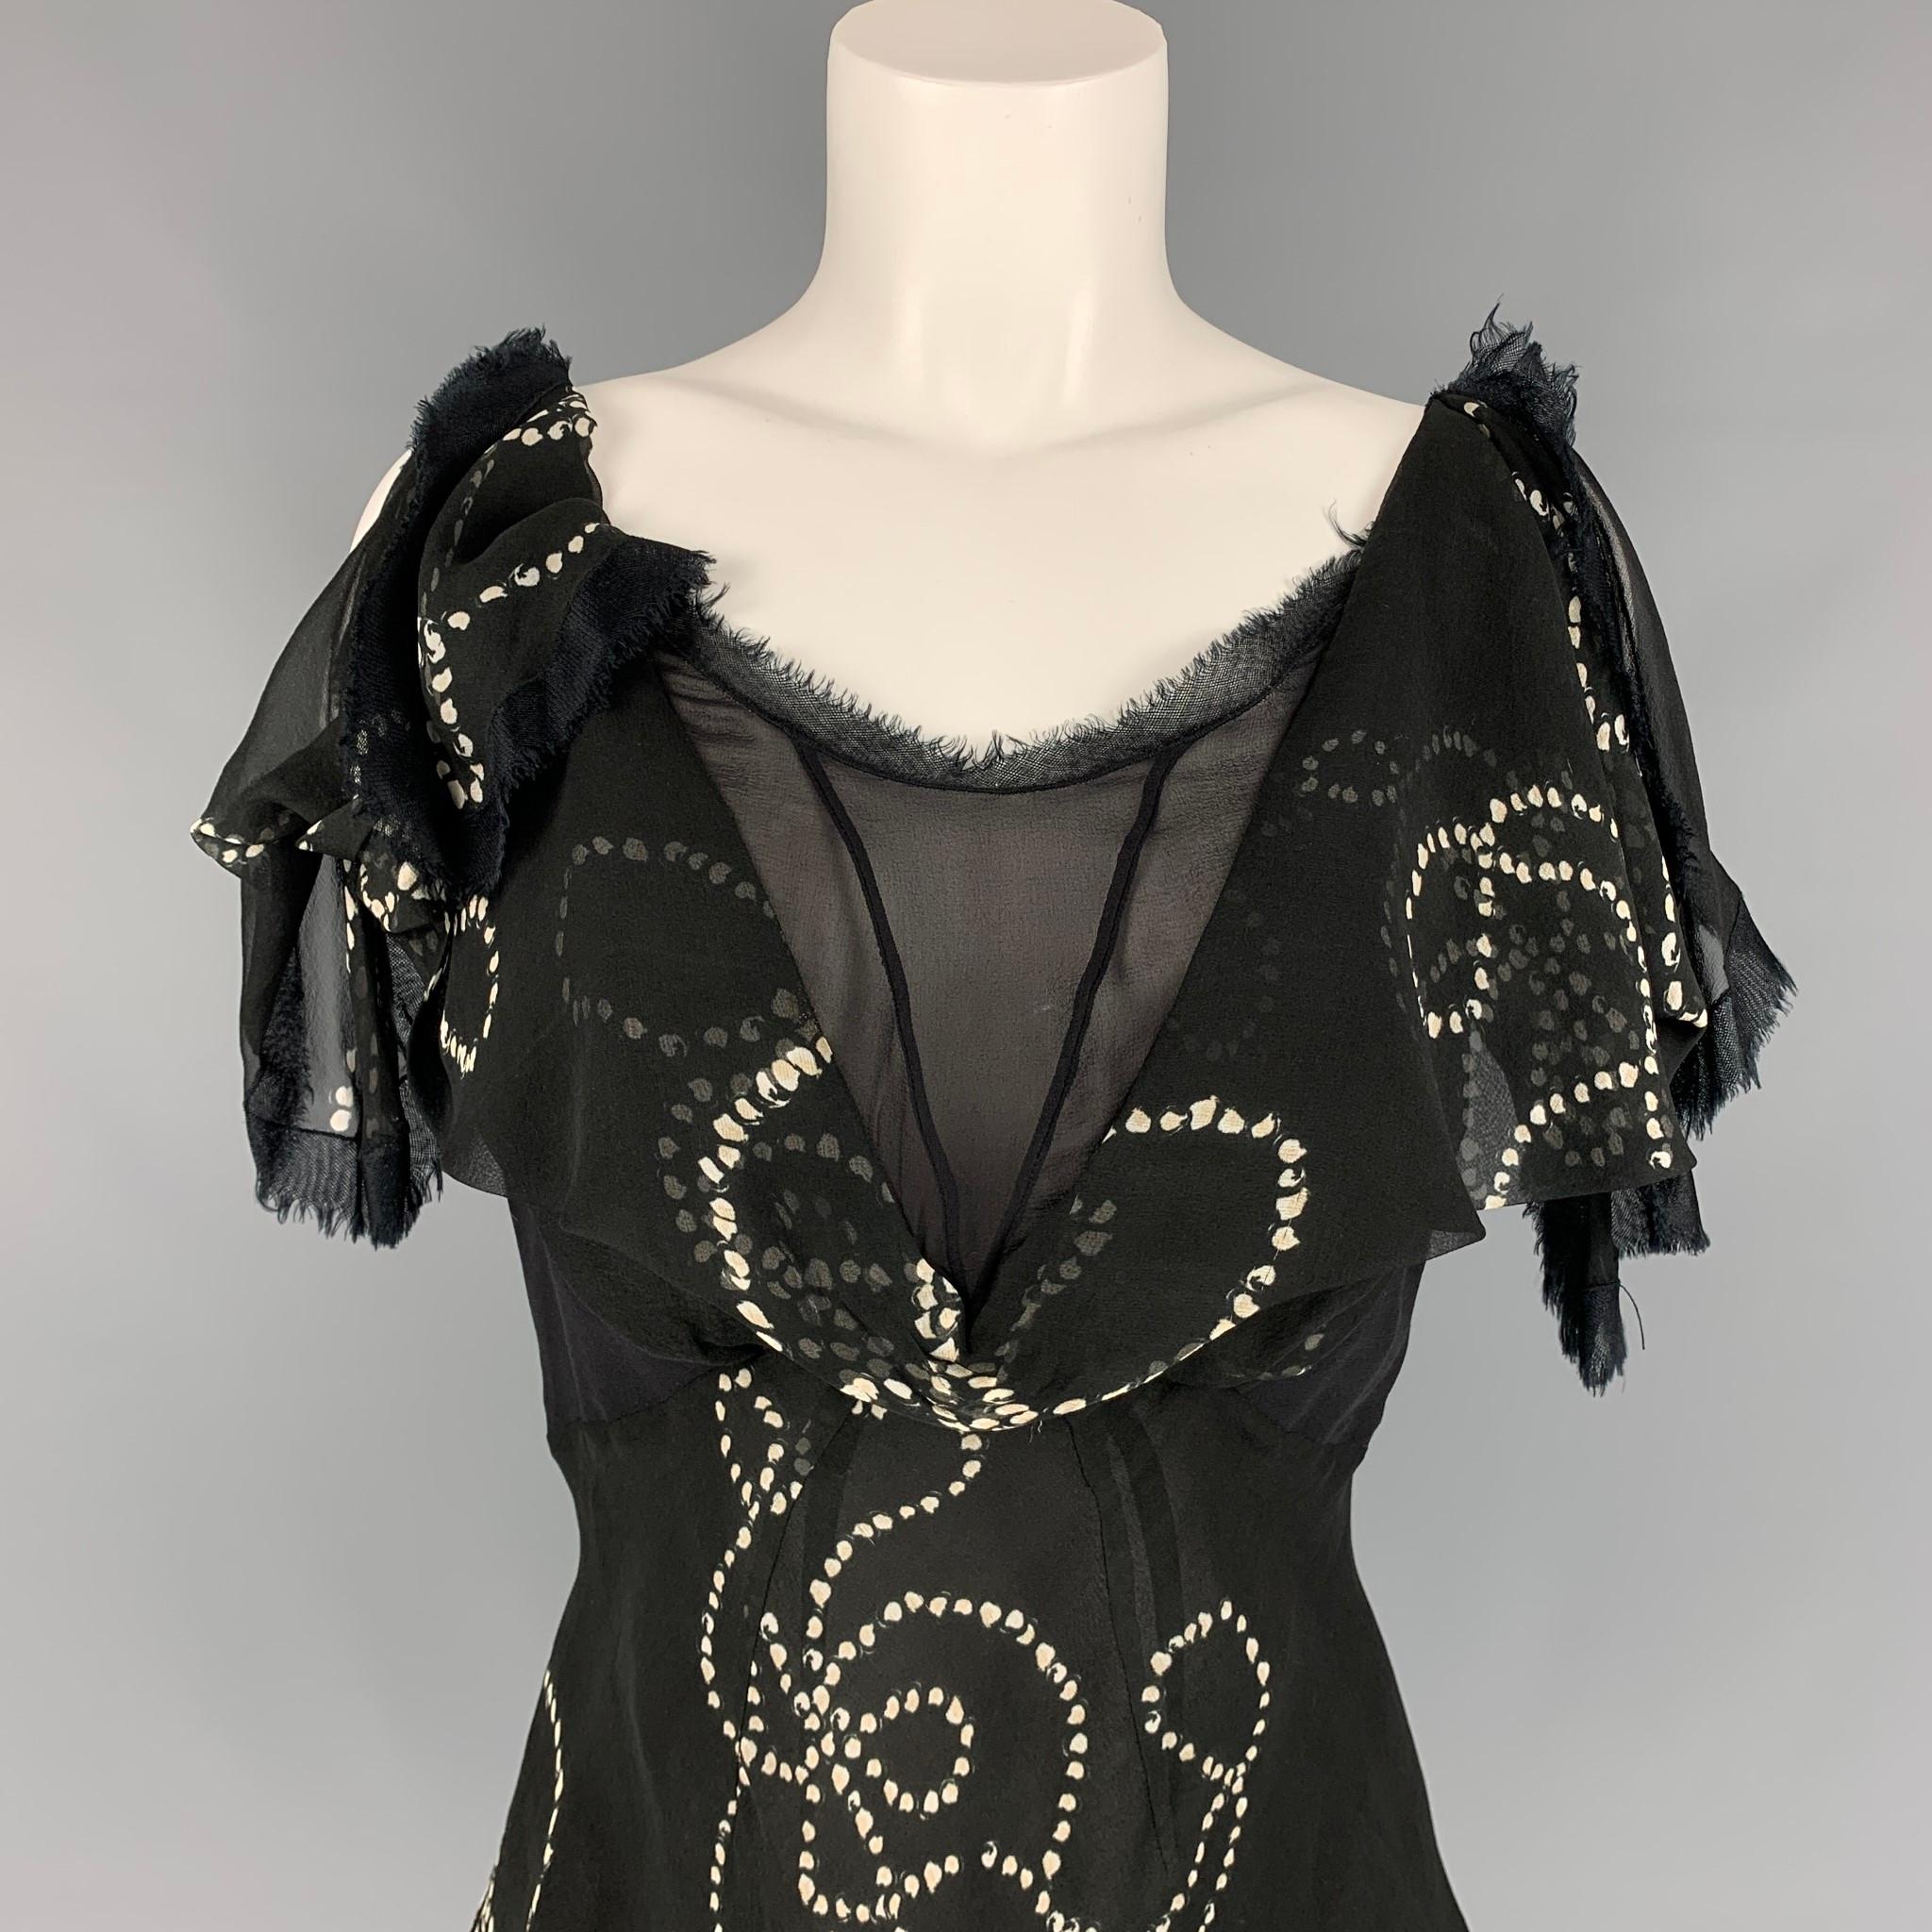 ZAC POSEN sleeveless blouse comes in a black & white chiffon silk featuring ruffled designs, raw edge, and a back zip up closure. 

Very Good Pre-Owned Condition.
Marked: 10

Measurements:

Bust: 34 in.
Length: 16 in. 